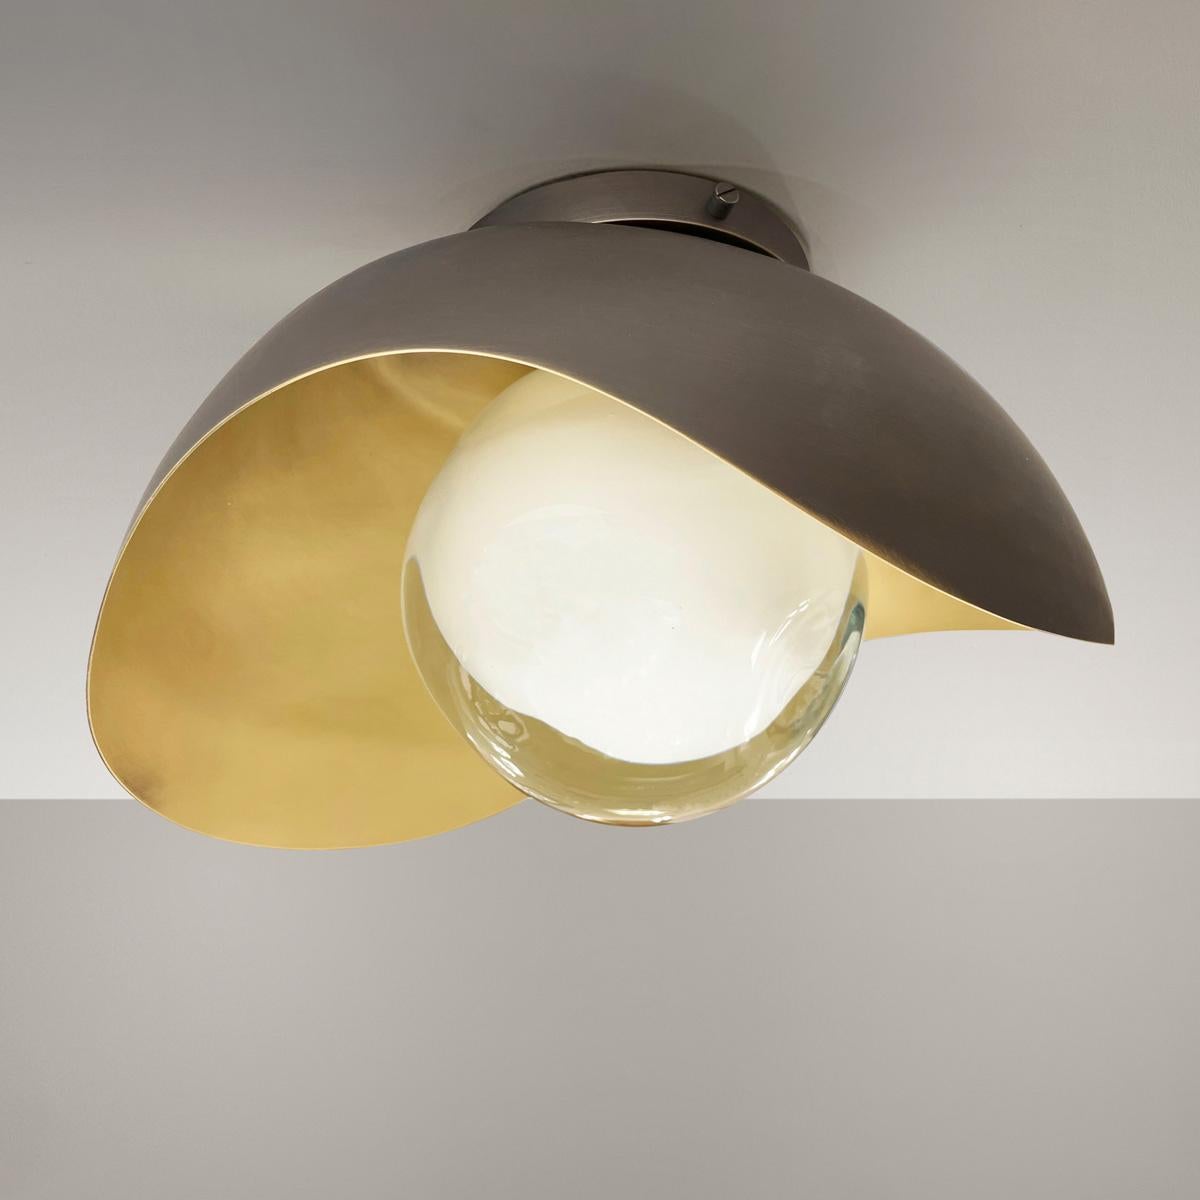 Perla Flushmount Ceiling Light by Gaspare Asaro-Satin Brass/Polished Nickel For Sale 1